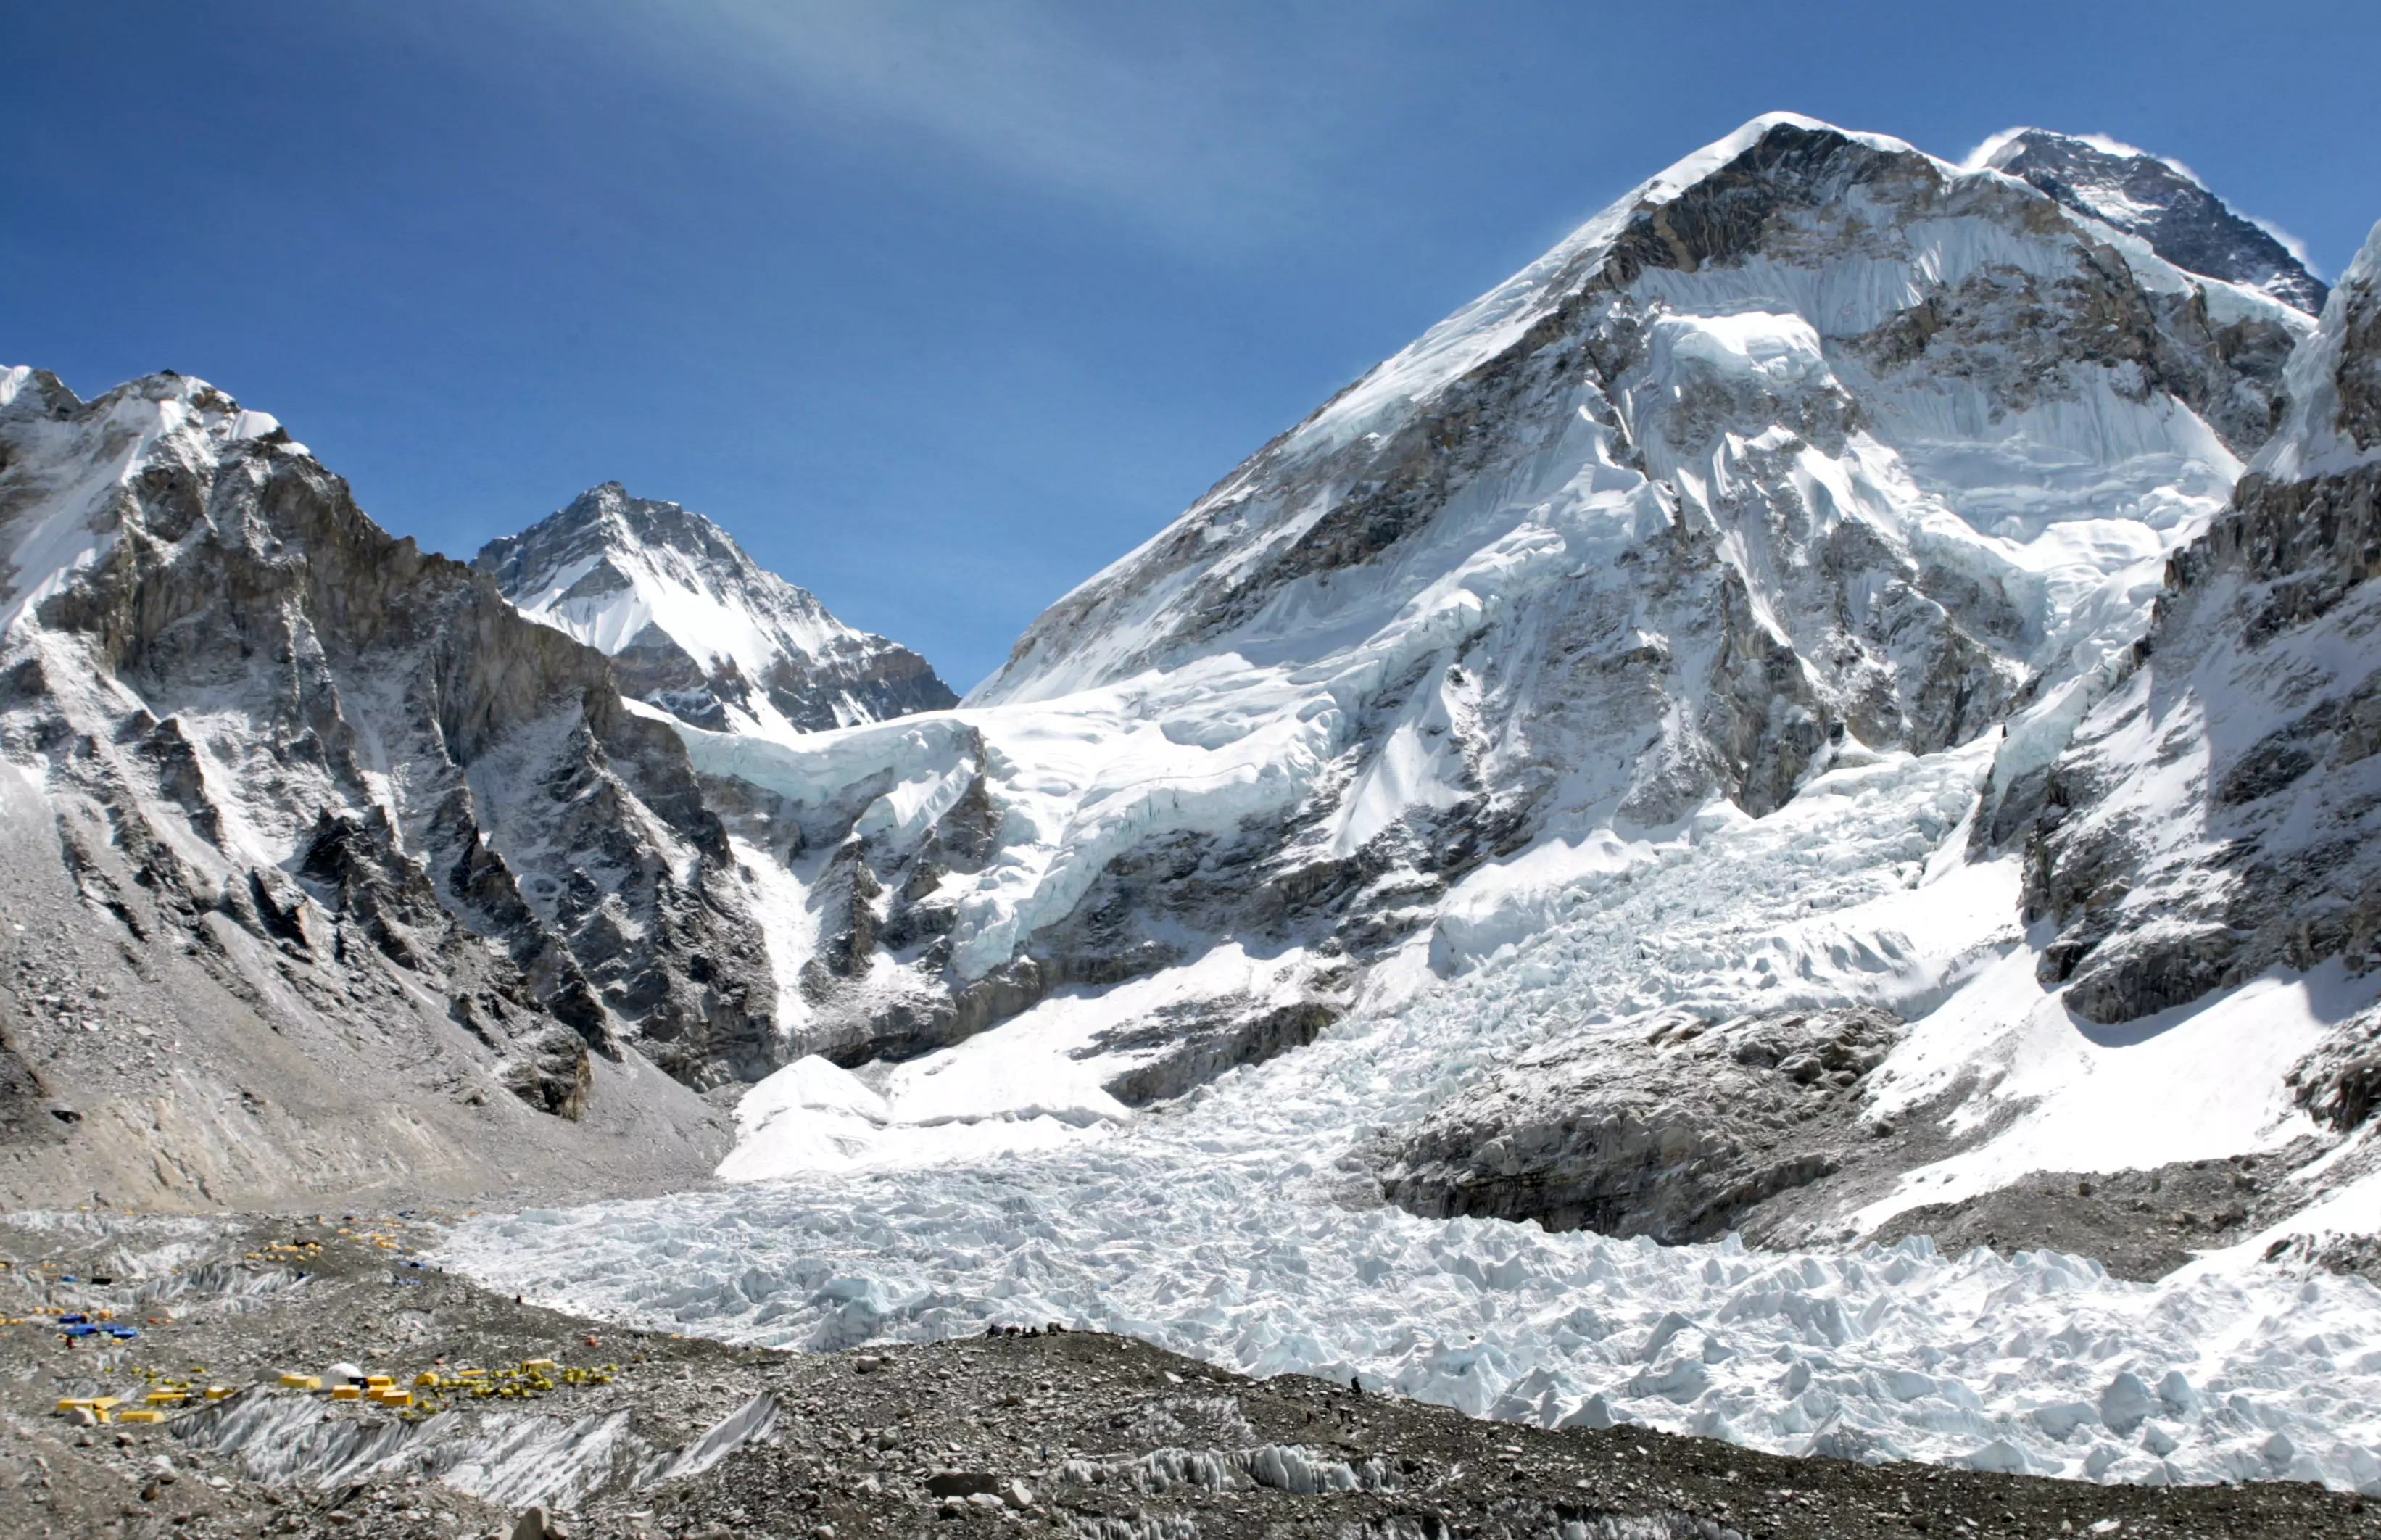 Many of the bodies have been found in the Khumbu Icefall.